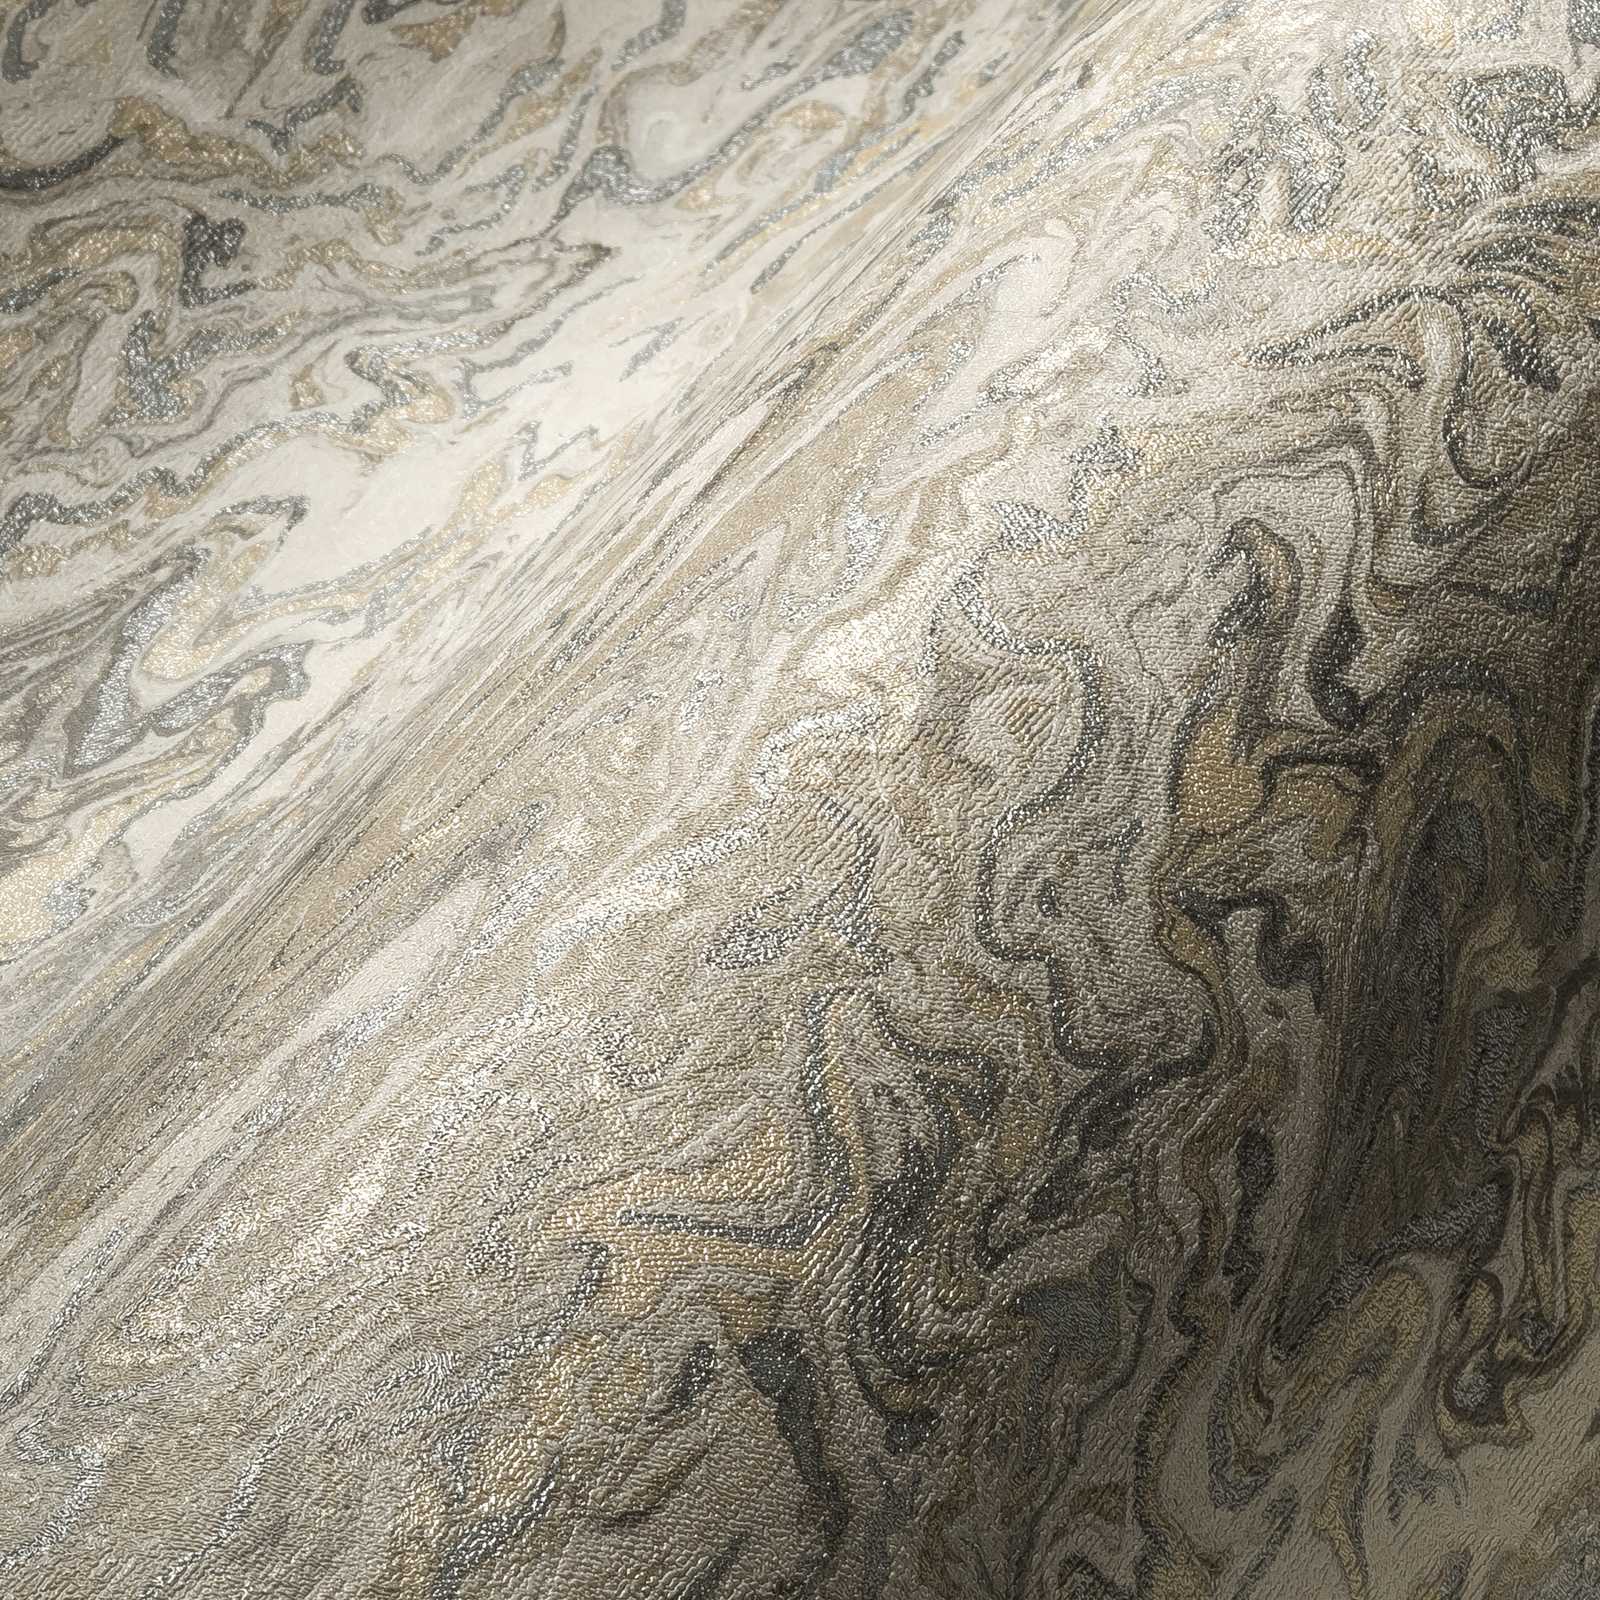             Marbled wallpaper Marble Paper effect - white, beige, cream
        